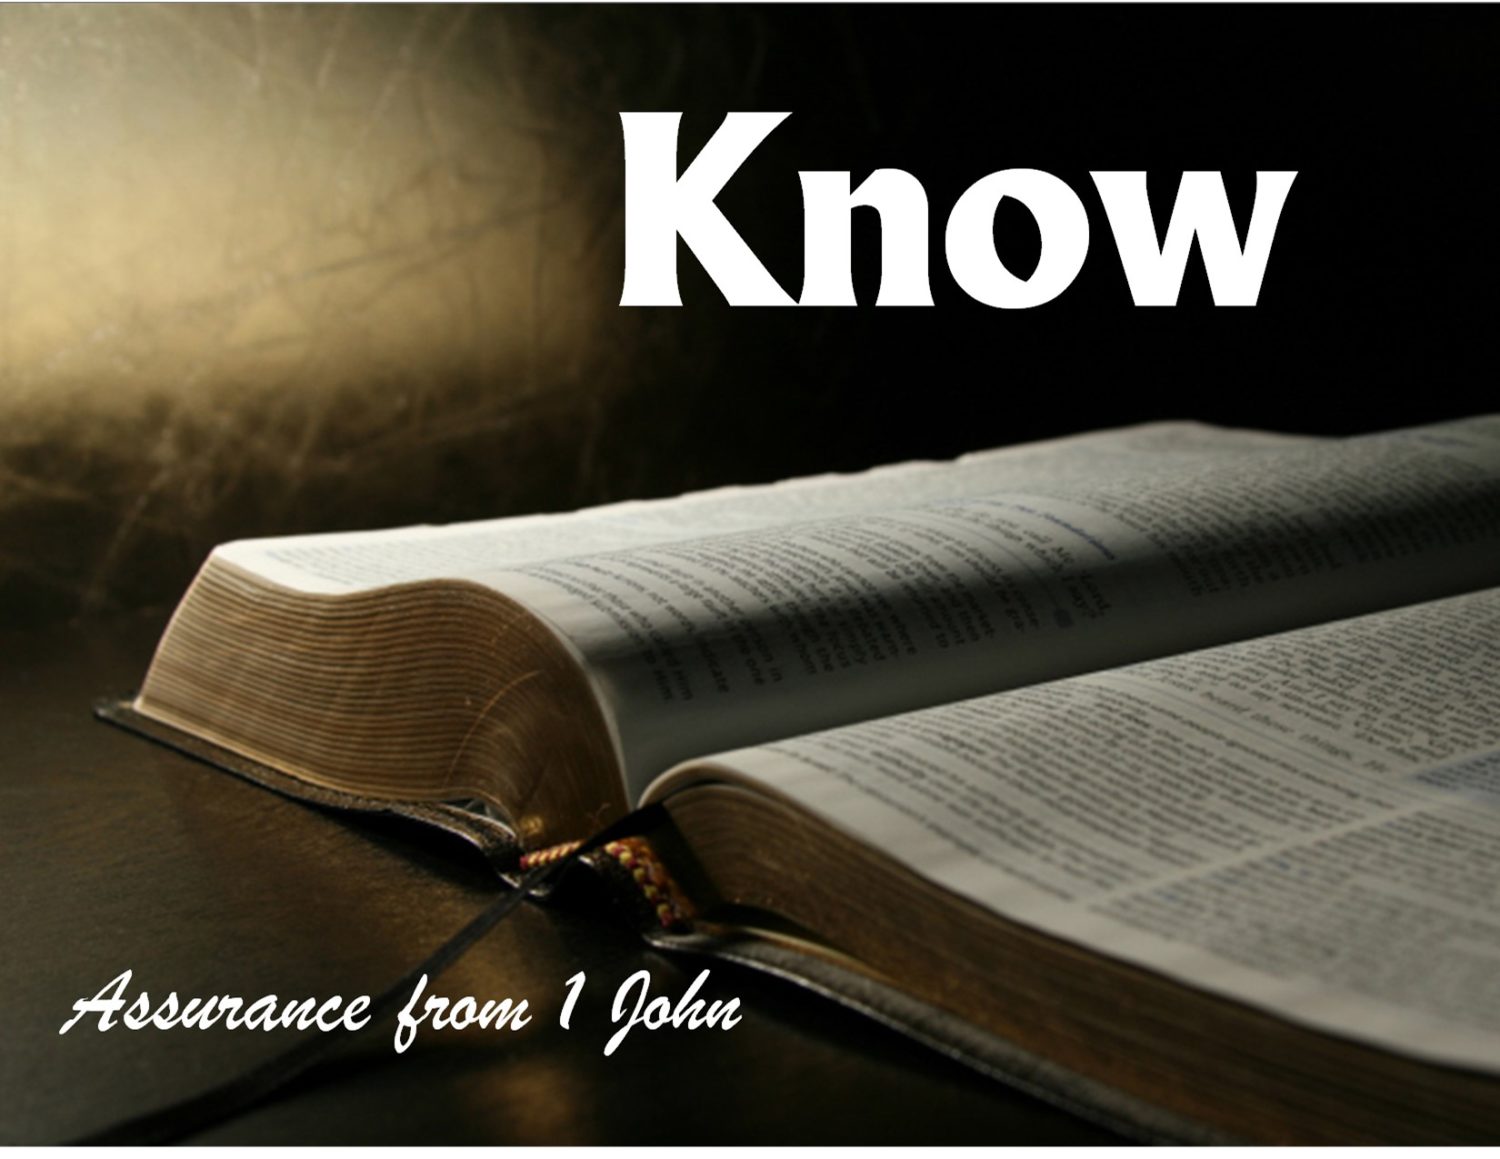 4. Know – We Know the Father’s Will Over the World